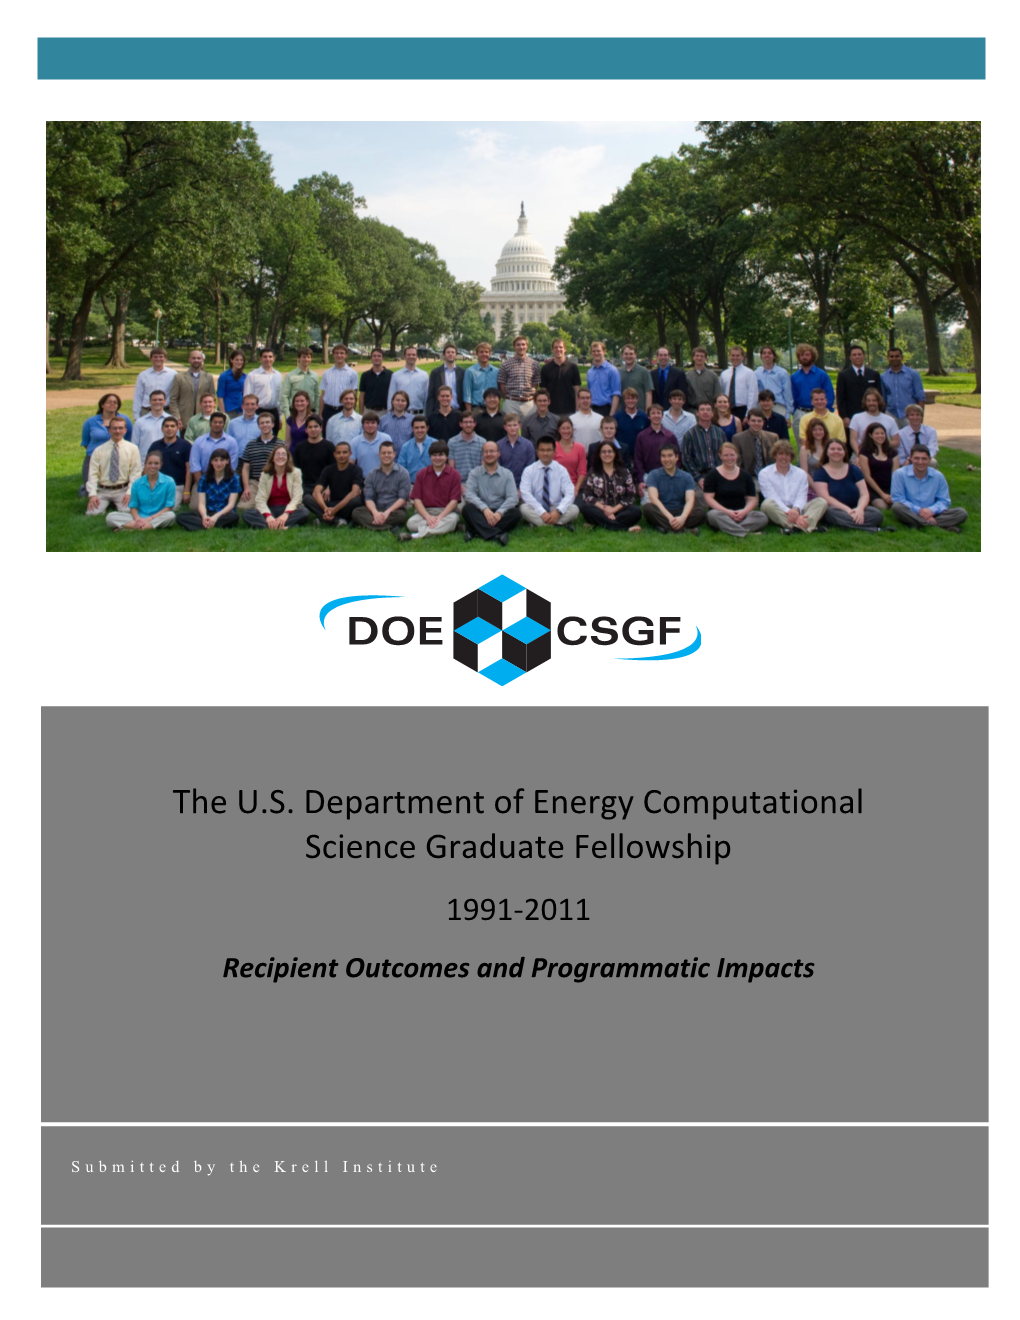 The U.S. Department of Energy Computational Science Graduate Fellowship 1991-2011 Recipient Outcomes and Programmatic Impacts